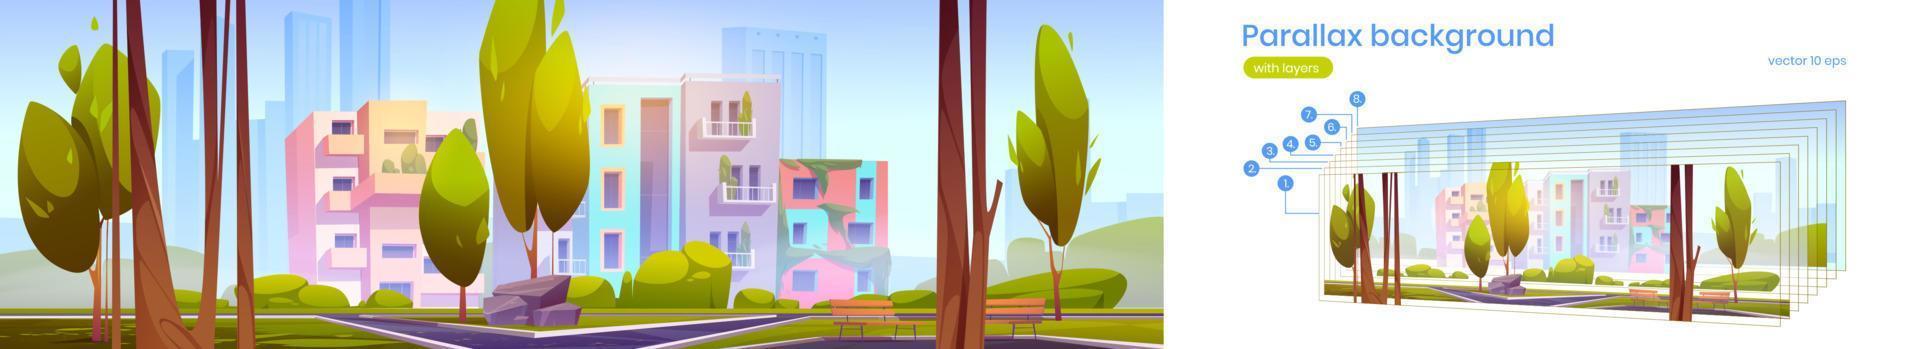 Parallax background with eco houses and city park vector